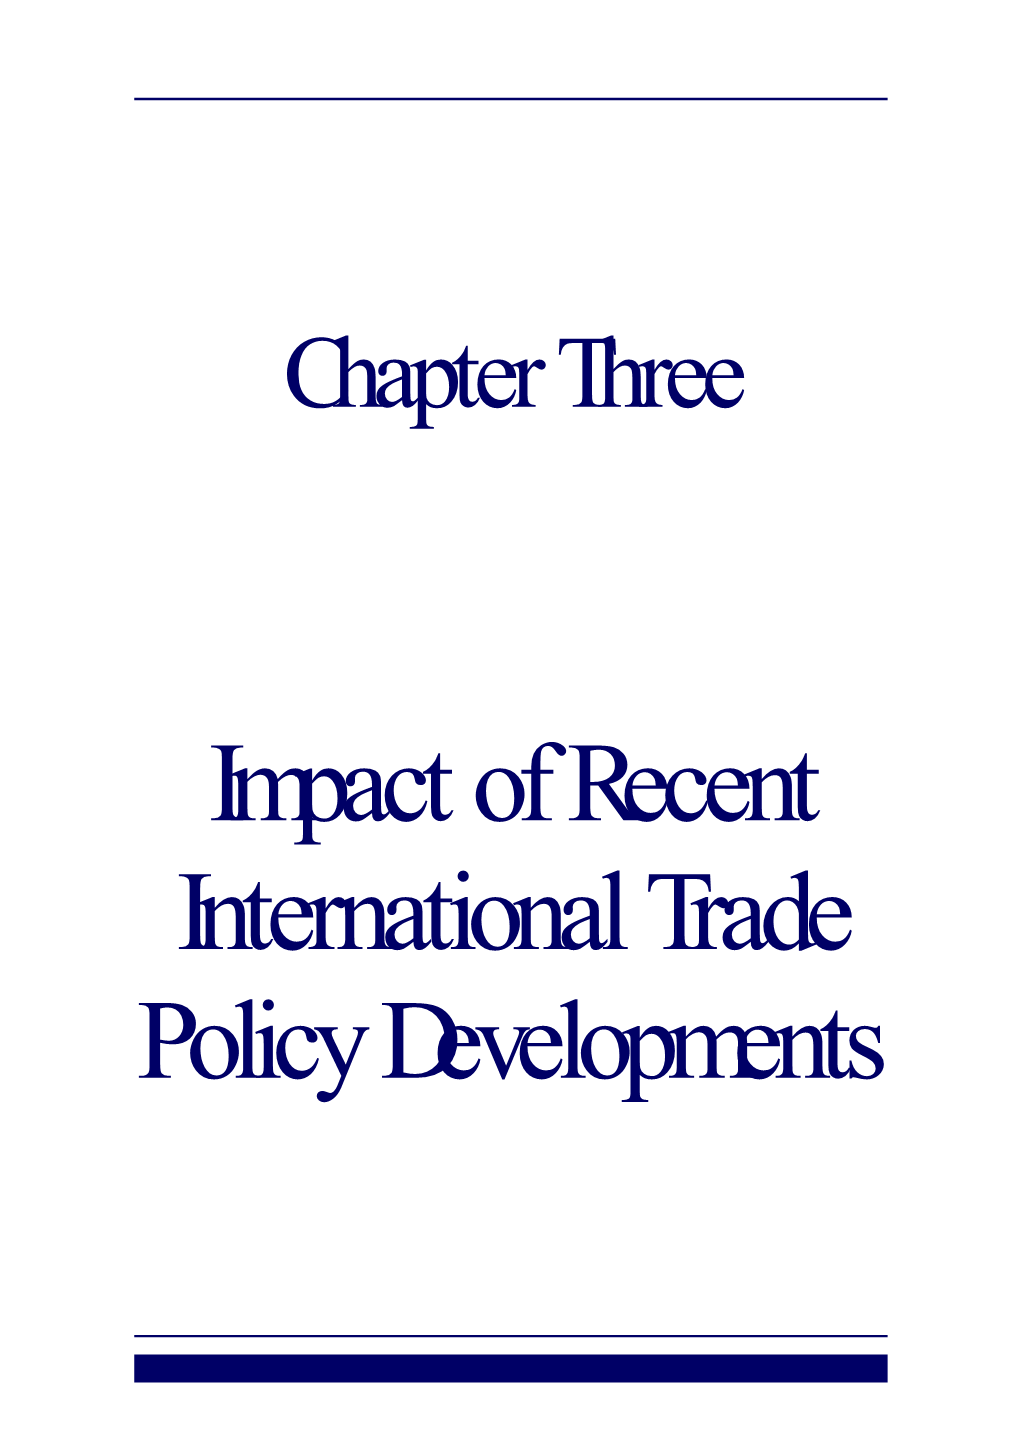 Chapter 3. Impact of Recent International Trade Policy